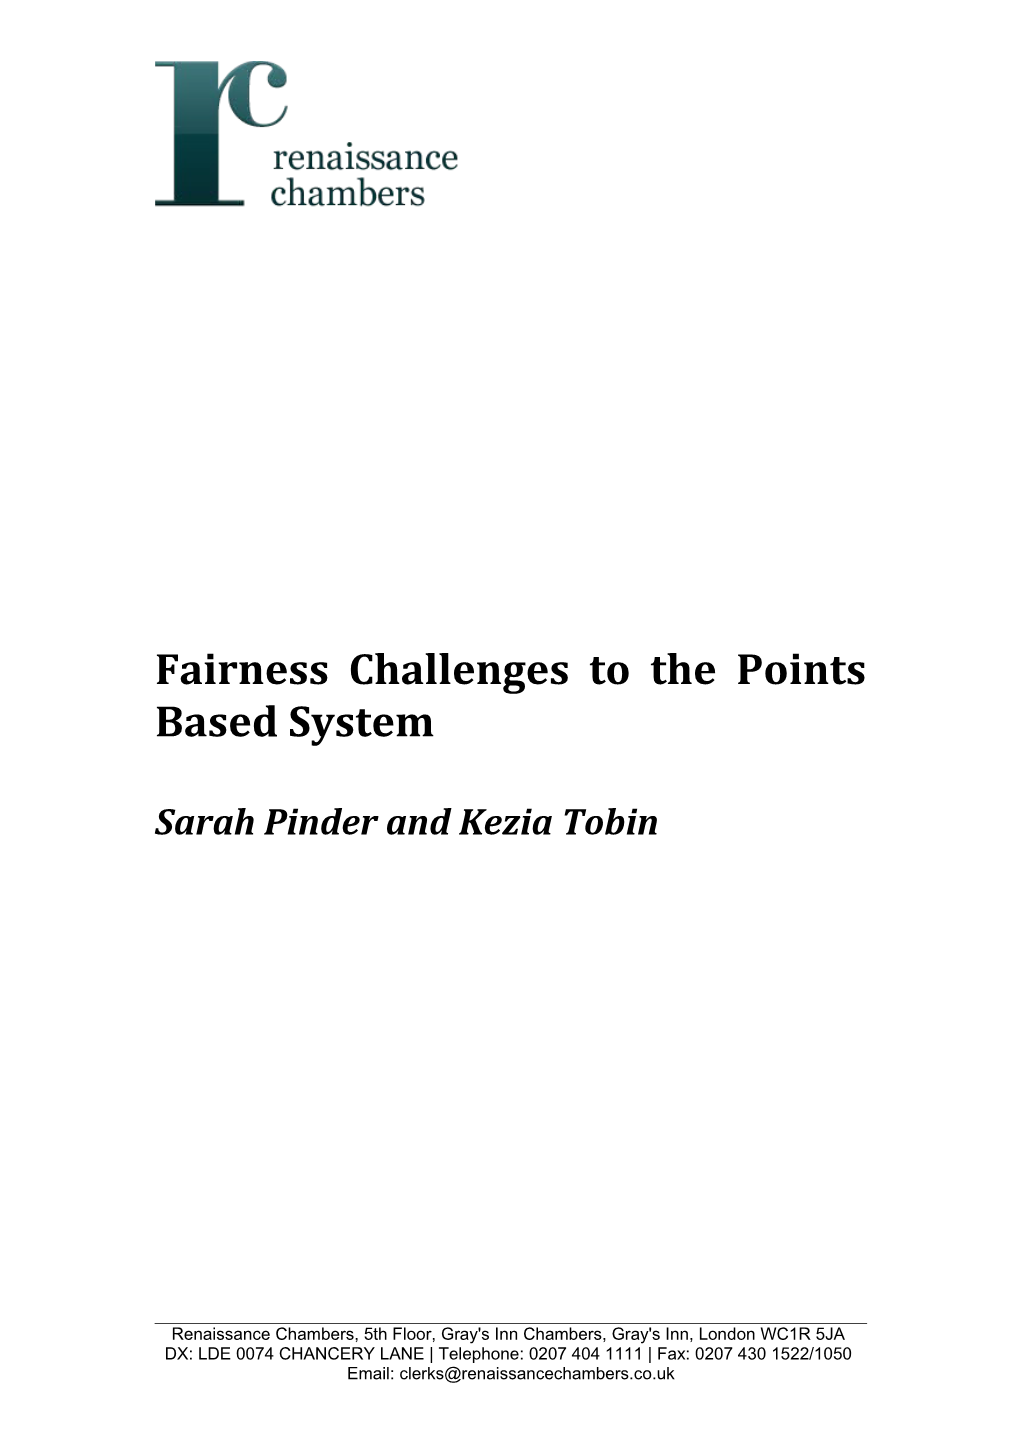 Fairness Challenges to the Points Based System